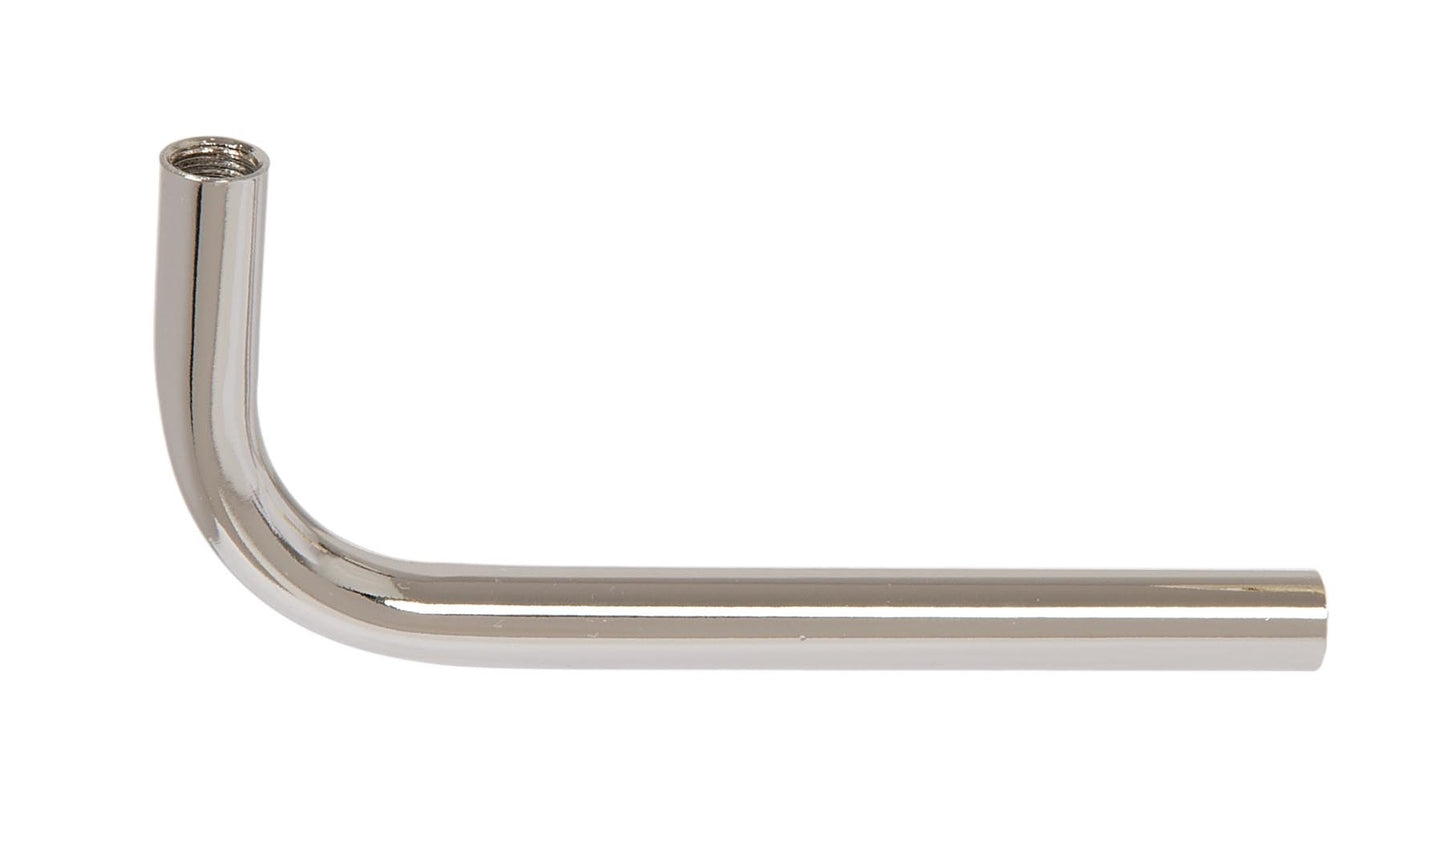 5-1/2 Inch Long Steel Nickel Plated Bent Lamp Arm, Tap 1/8F